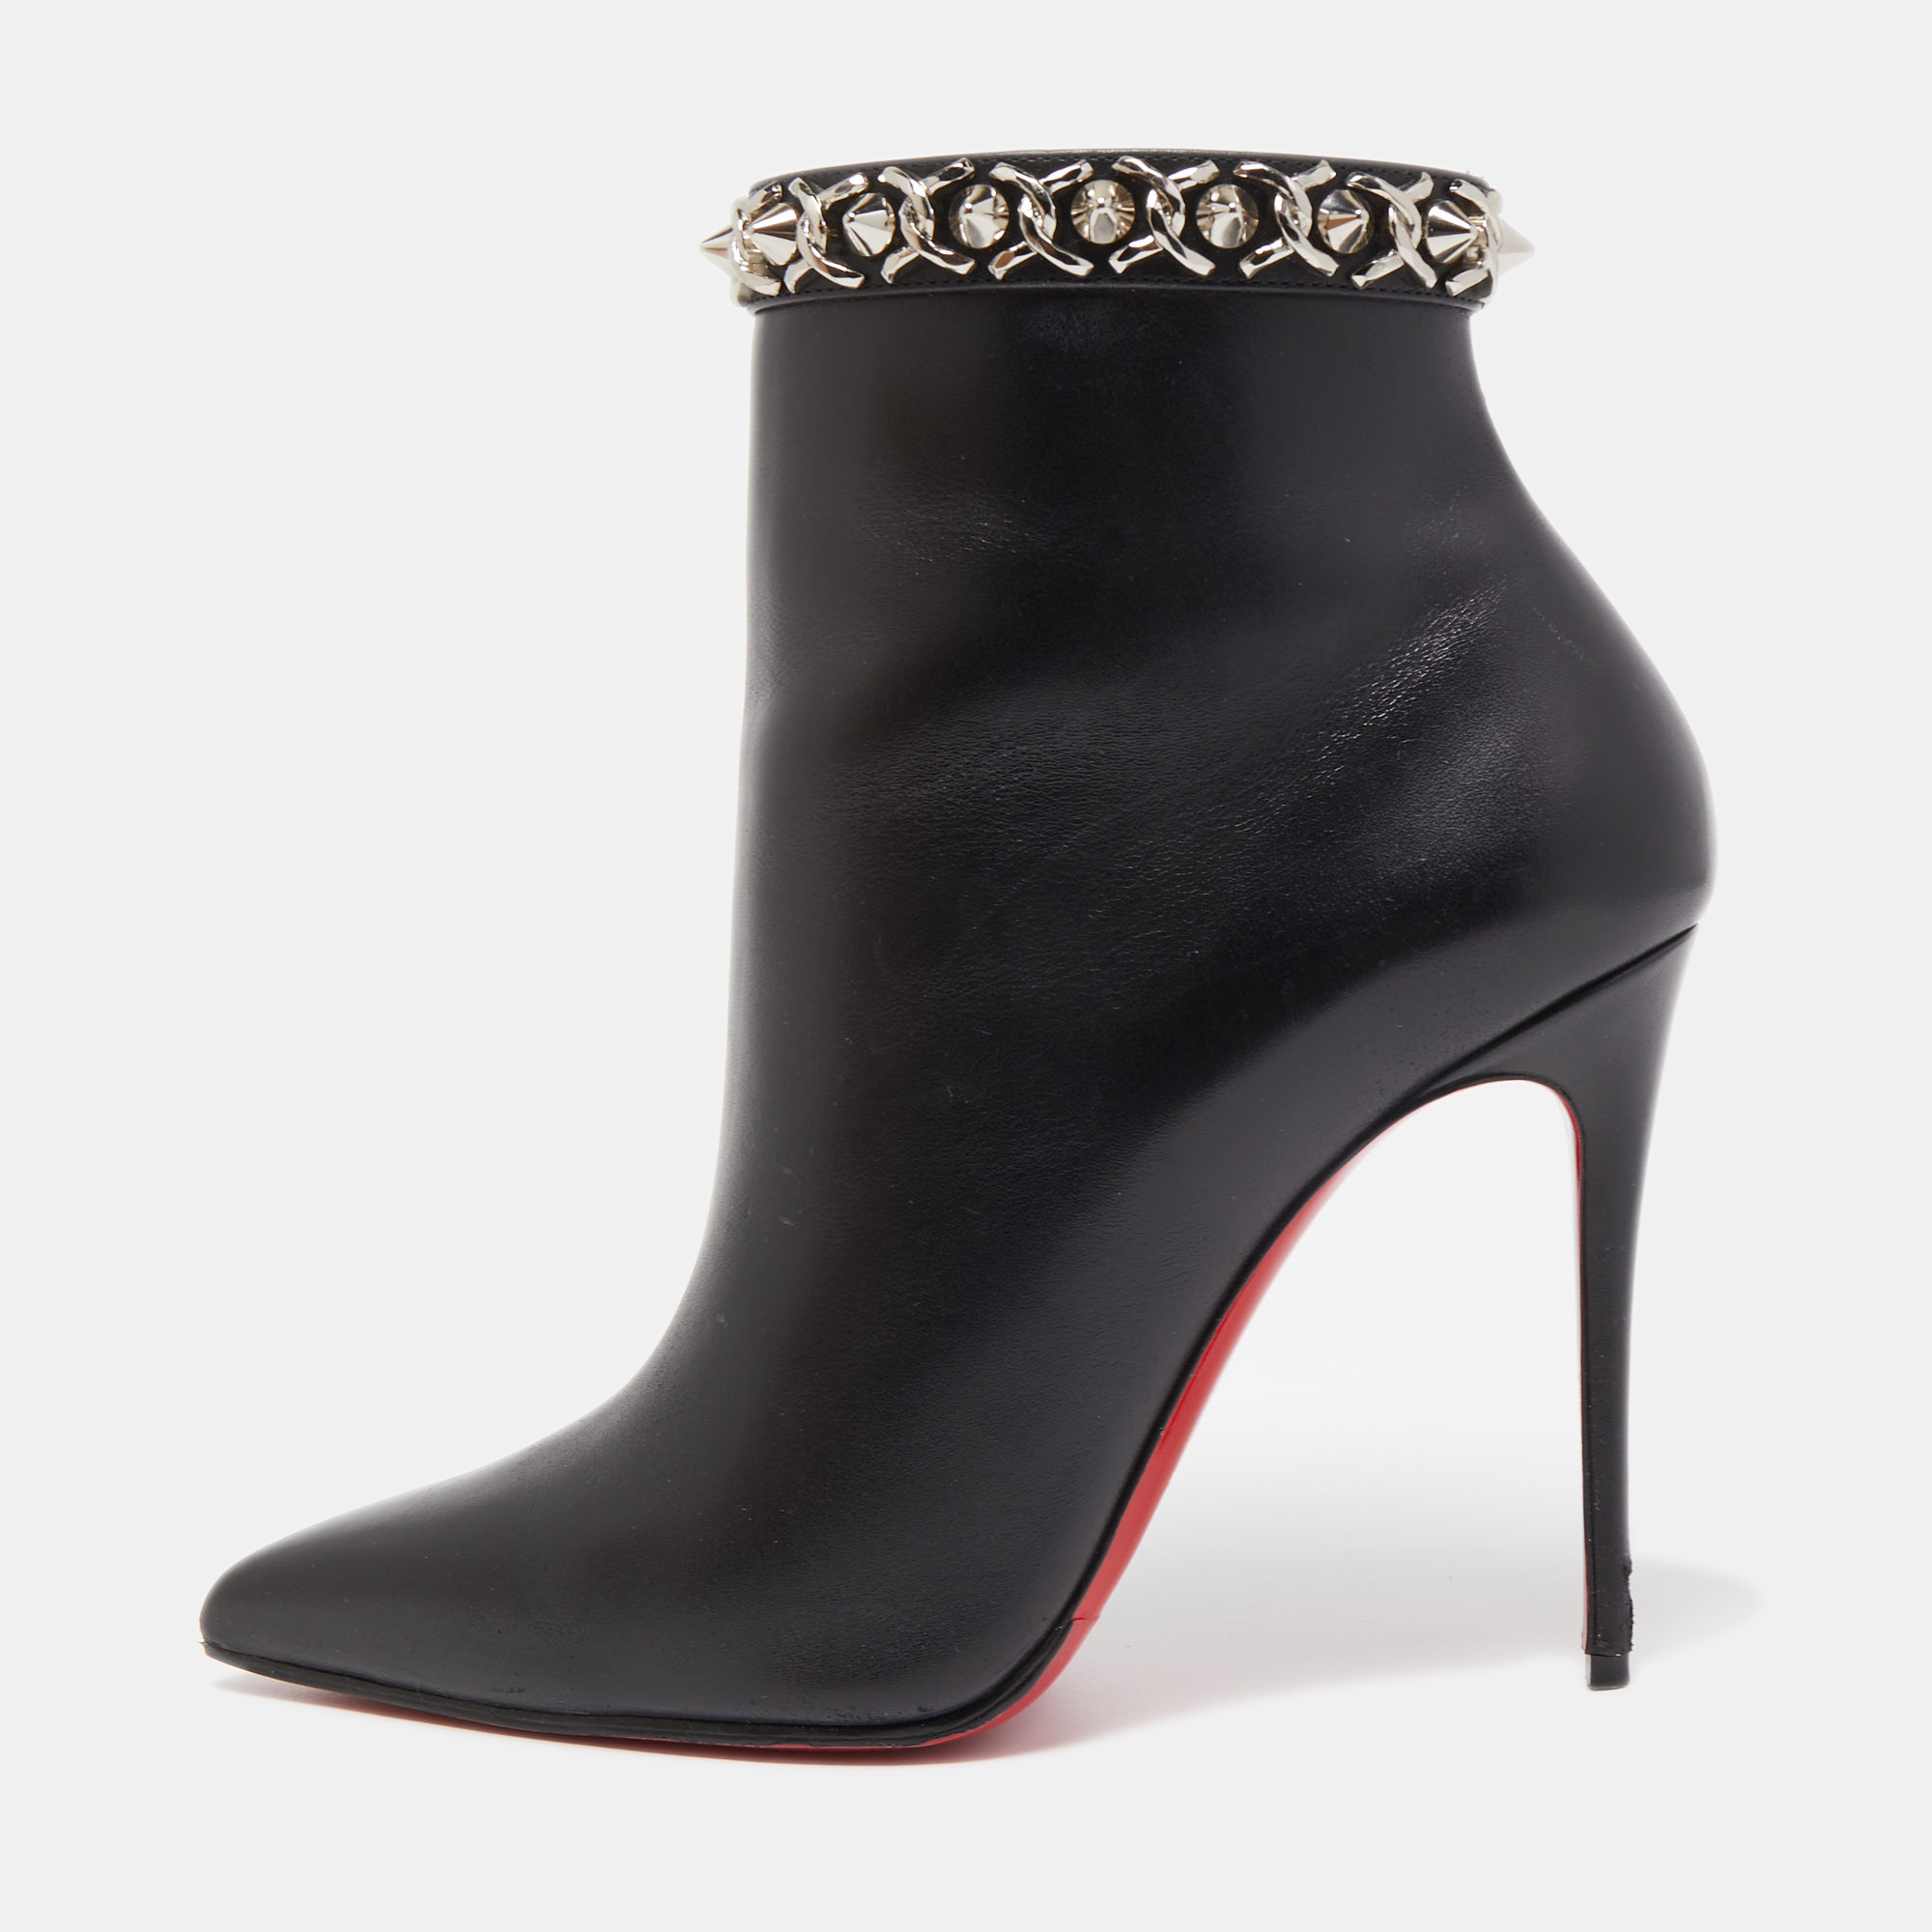 CHRISTIAN LOUBOUTIN WOMENS BLACK SIZE 39 Size 8 US BOURGE BOOTS LEATHER  Preowned